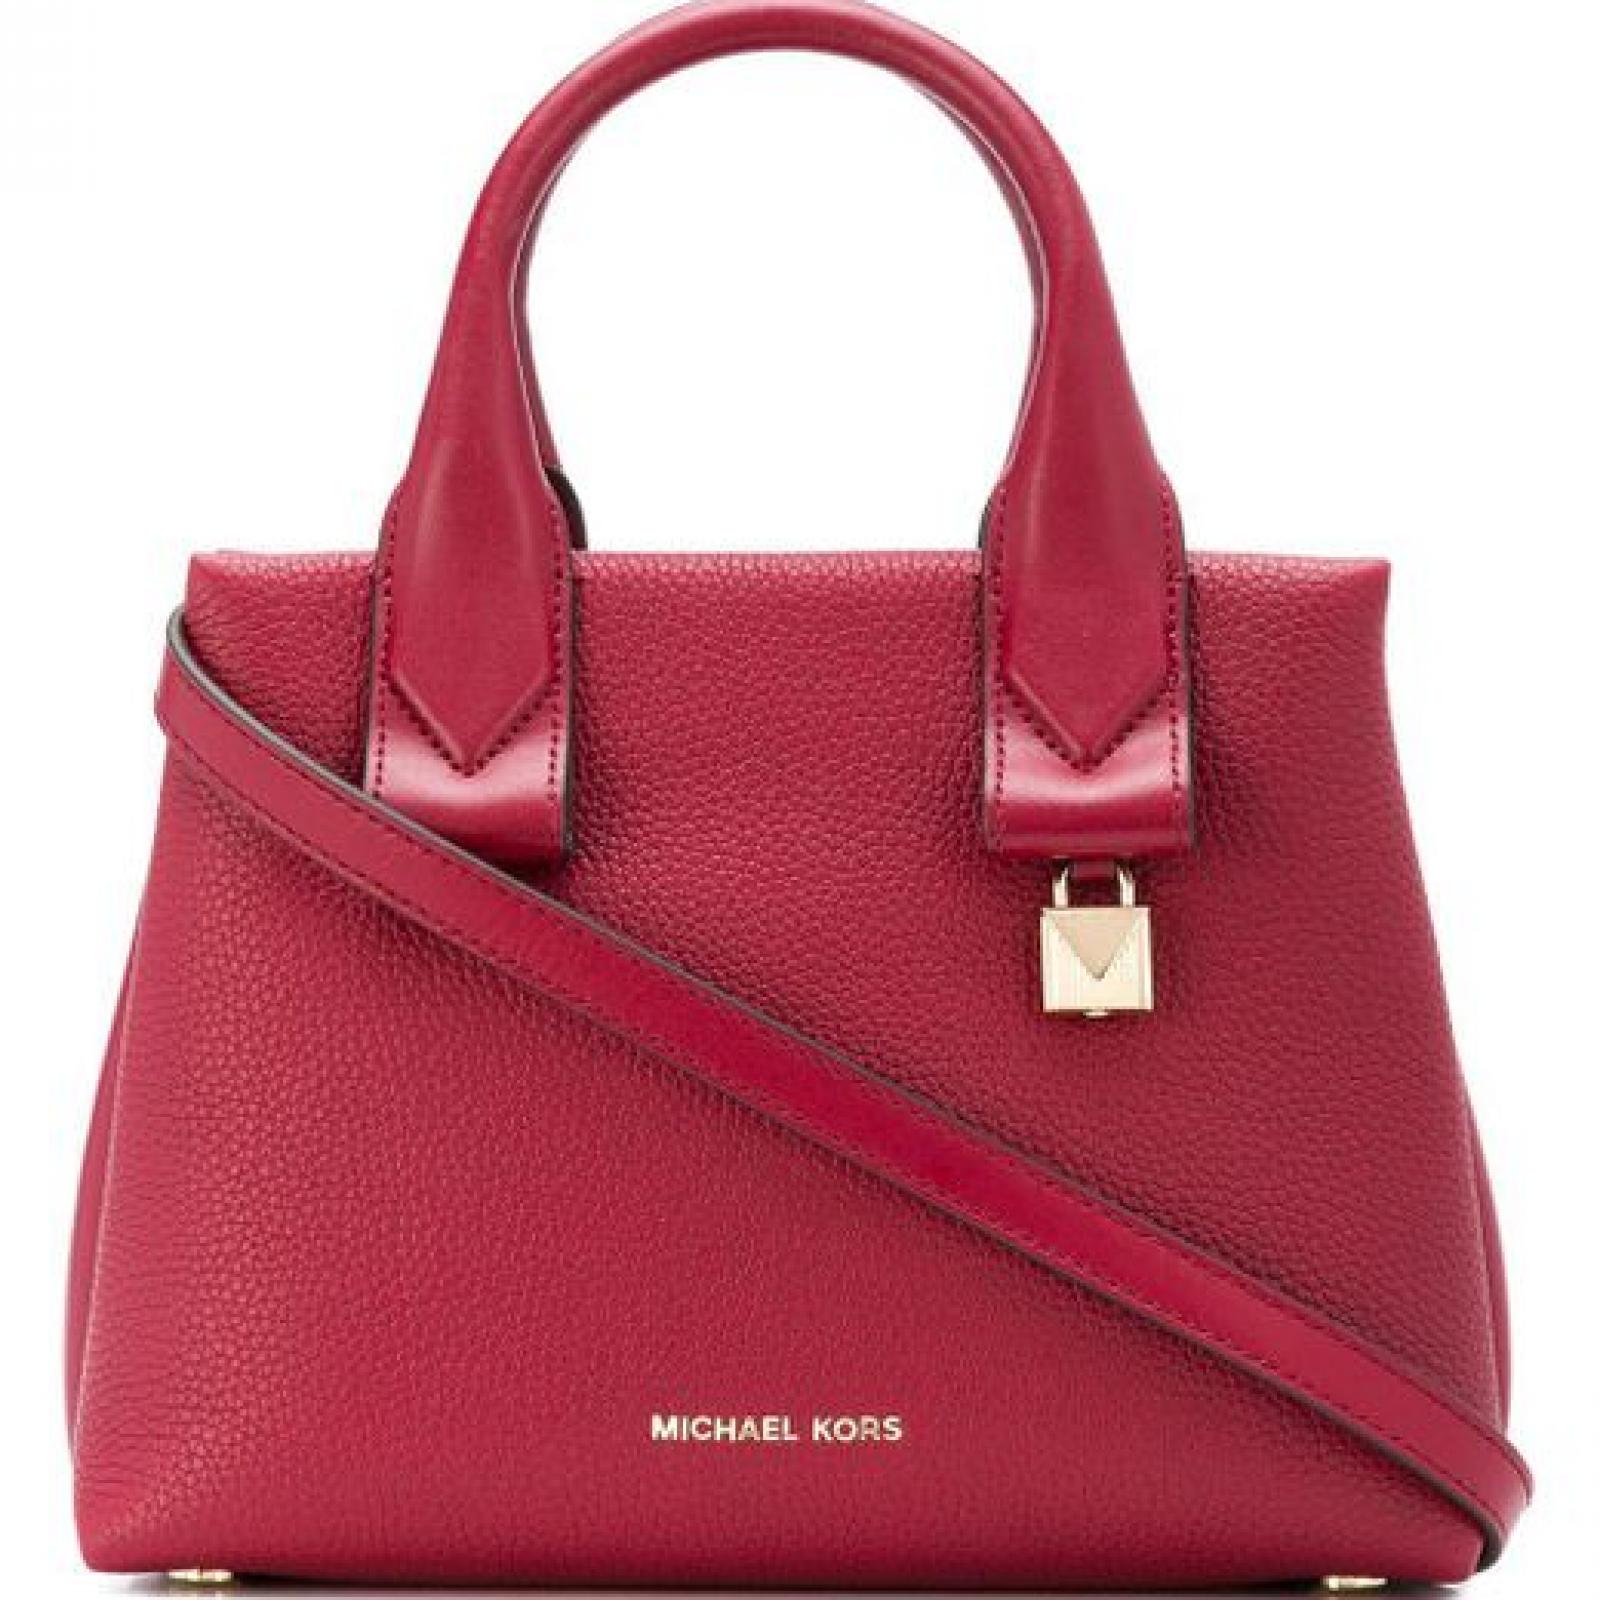 Michael Kors Rollins Small Satchel in leather - 1